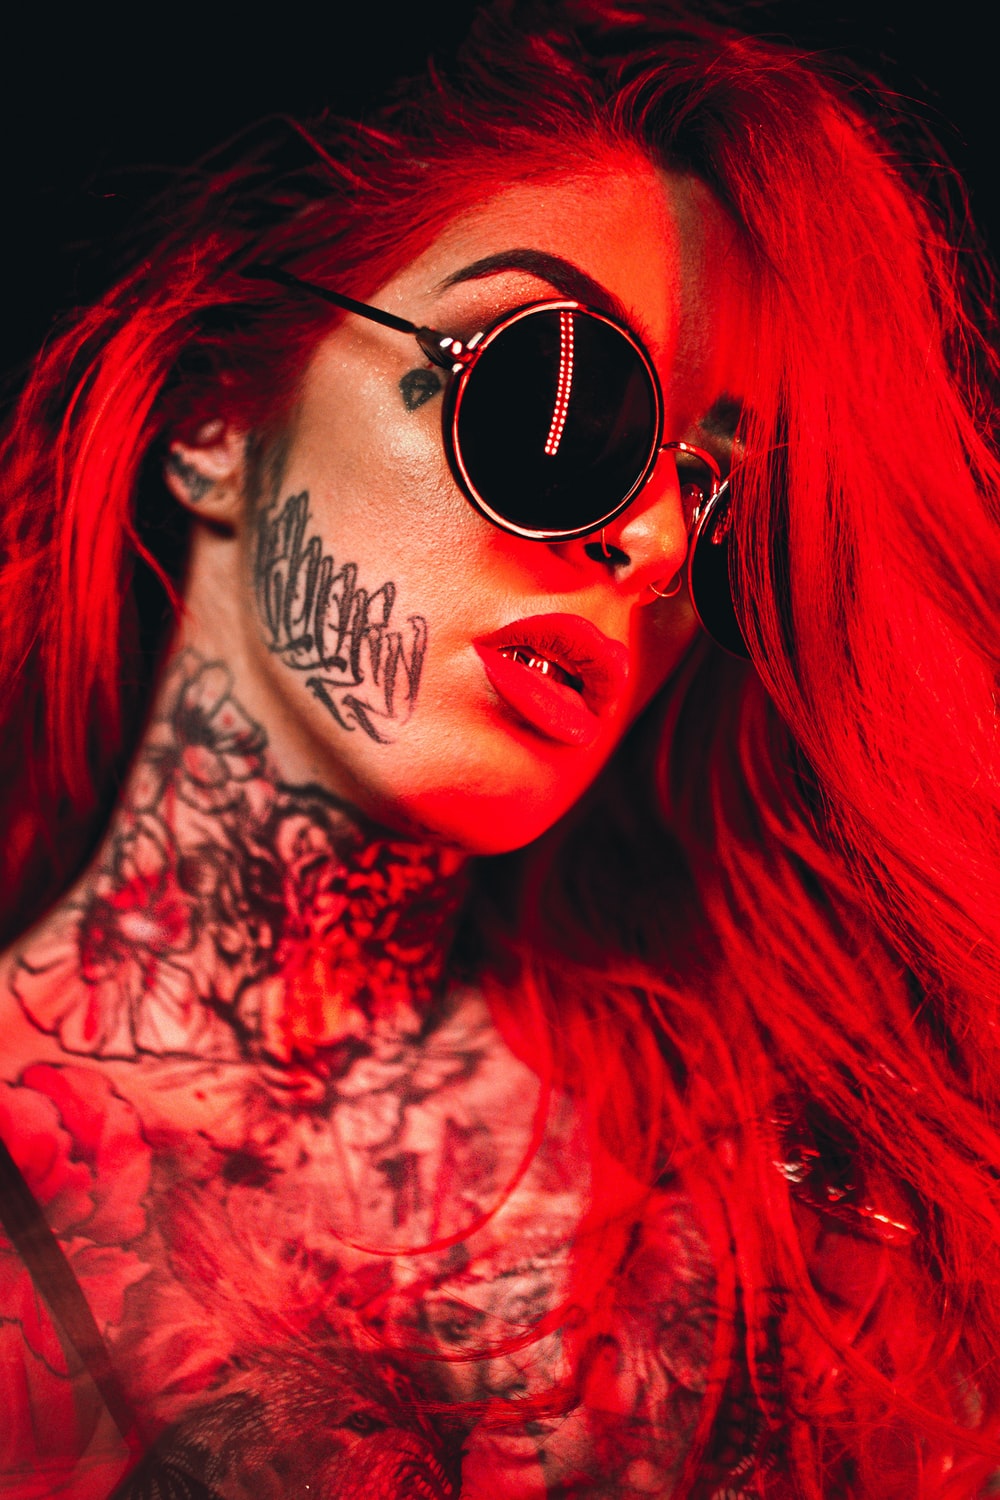 Tattoo Girl Picture. Download Free Image